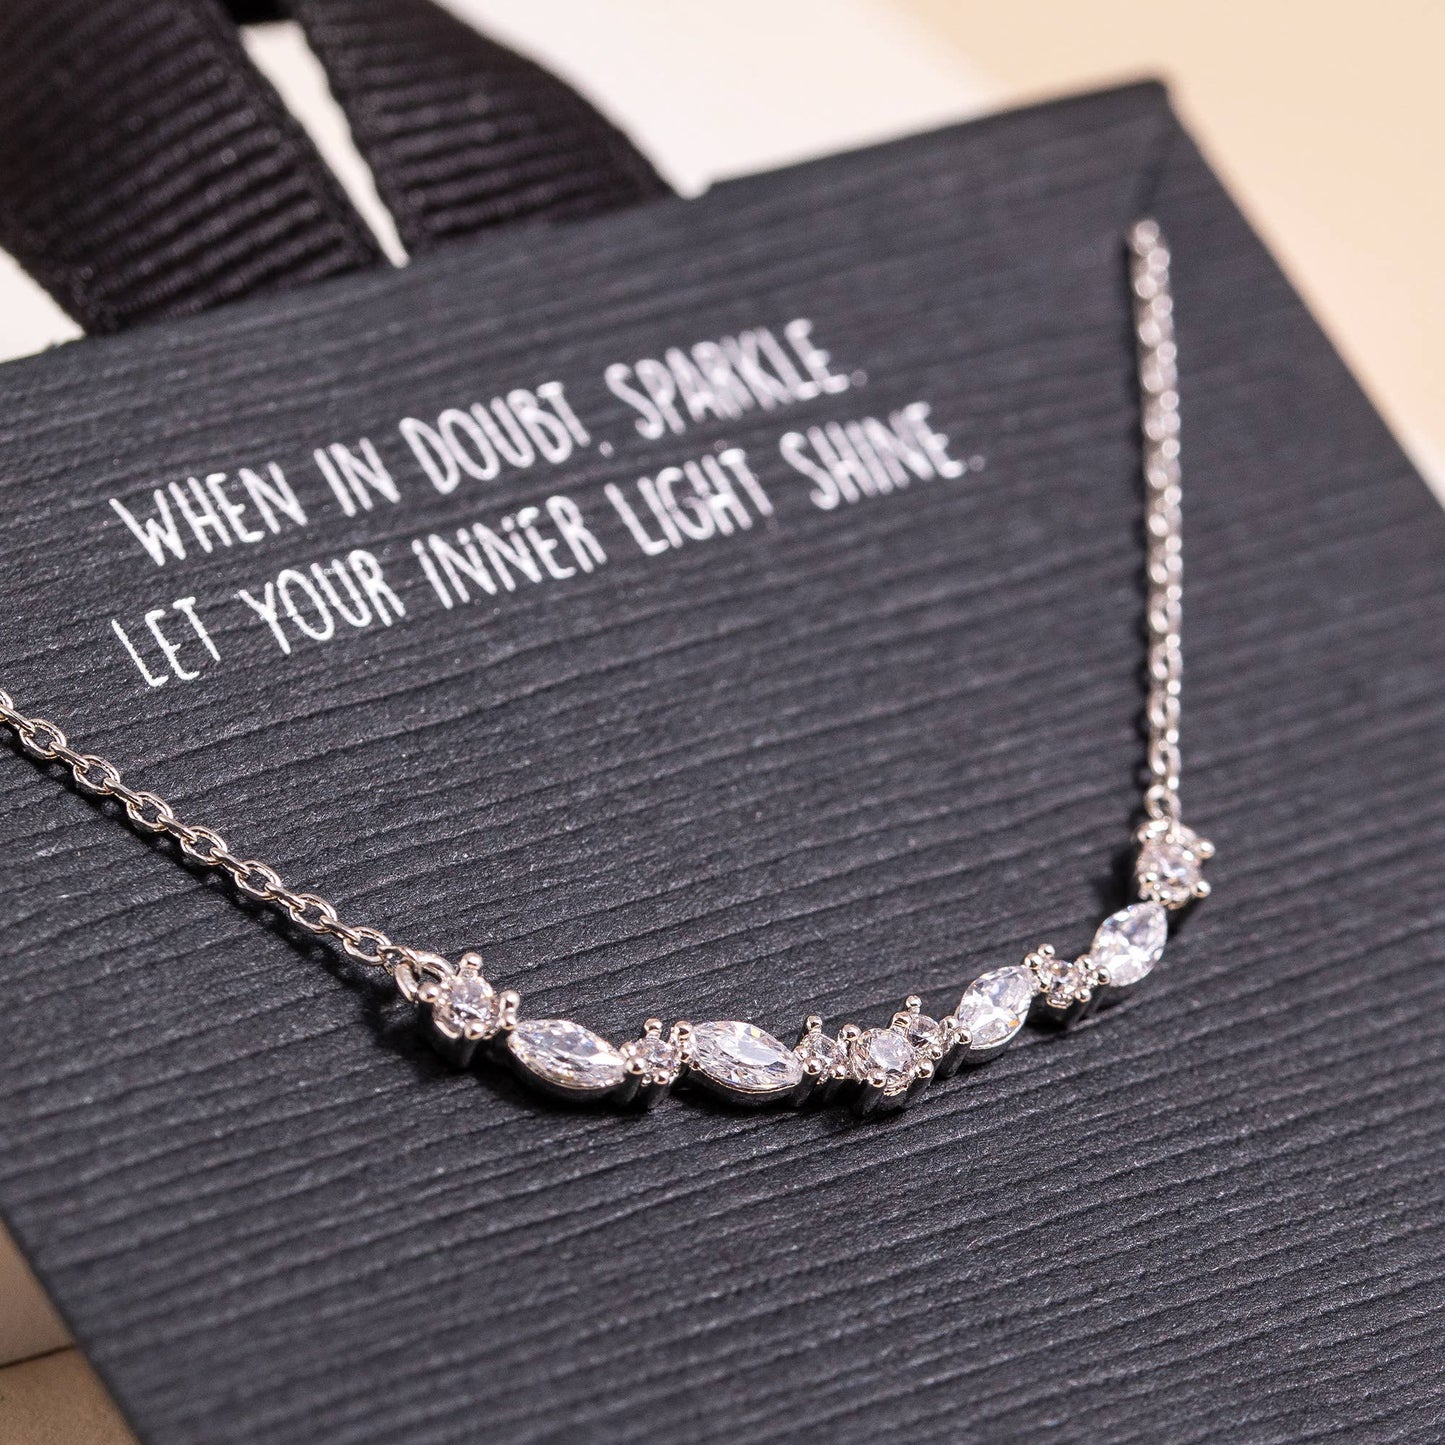 “When in doubt” Curved Bar Necklace - A Little More Boutique